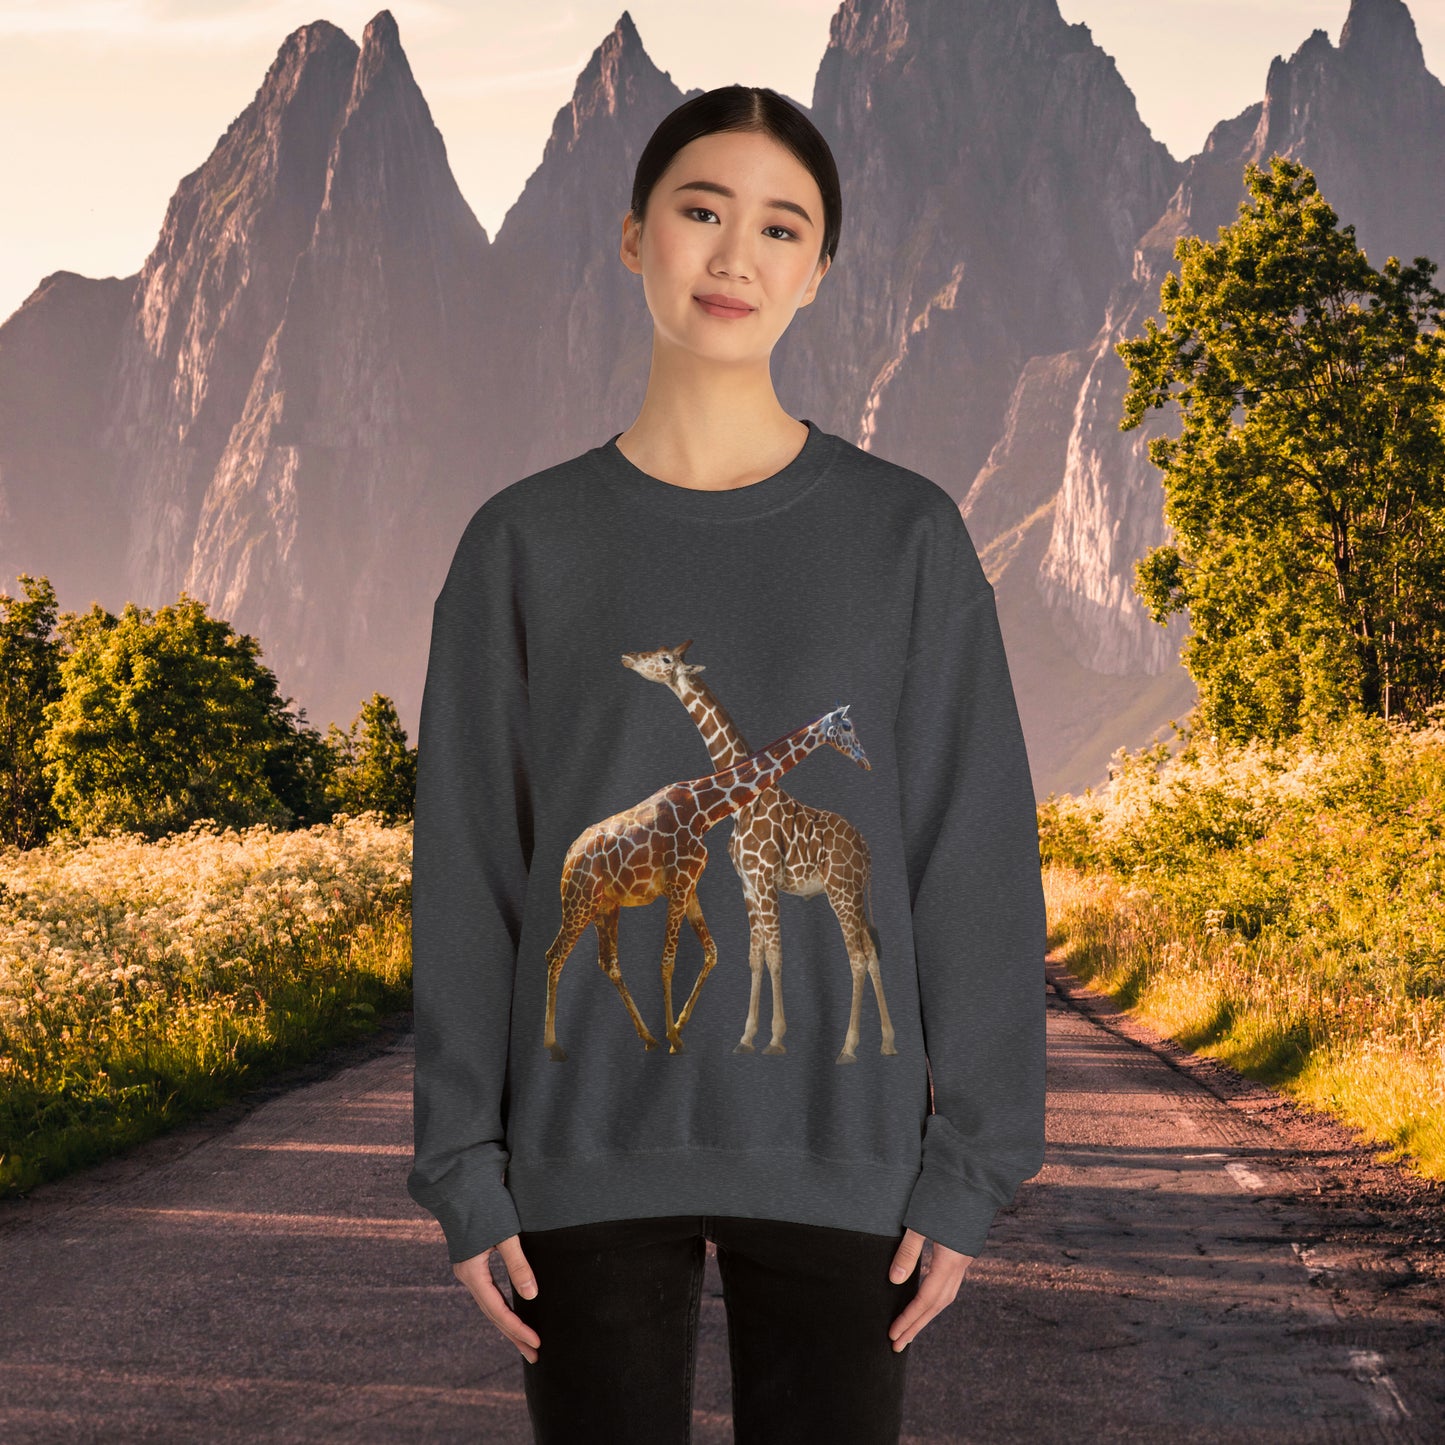 Love giraffes? Well here’s the sweatshirt for you! Give the gift of this Unisex Heavy Blend™ Crewneck Sweatshirt or get one for yourself.